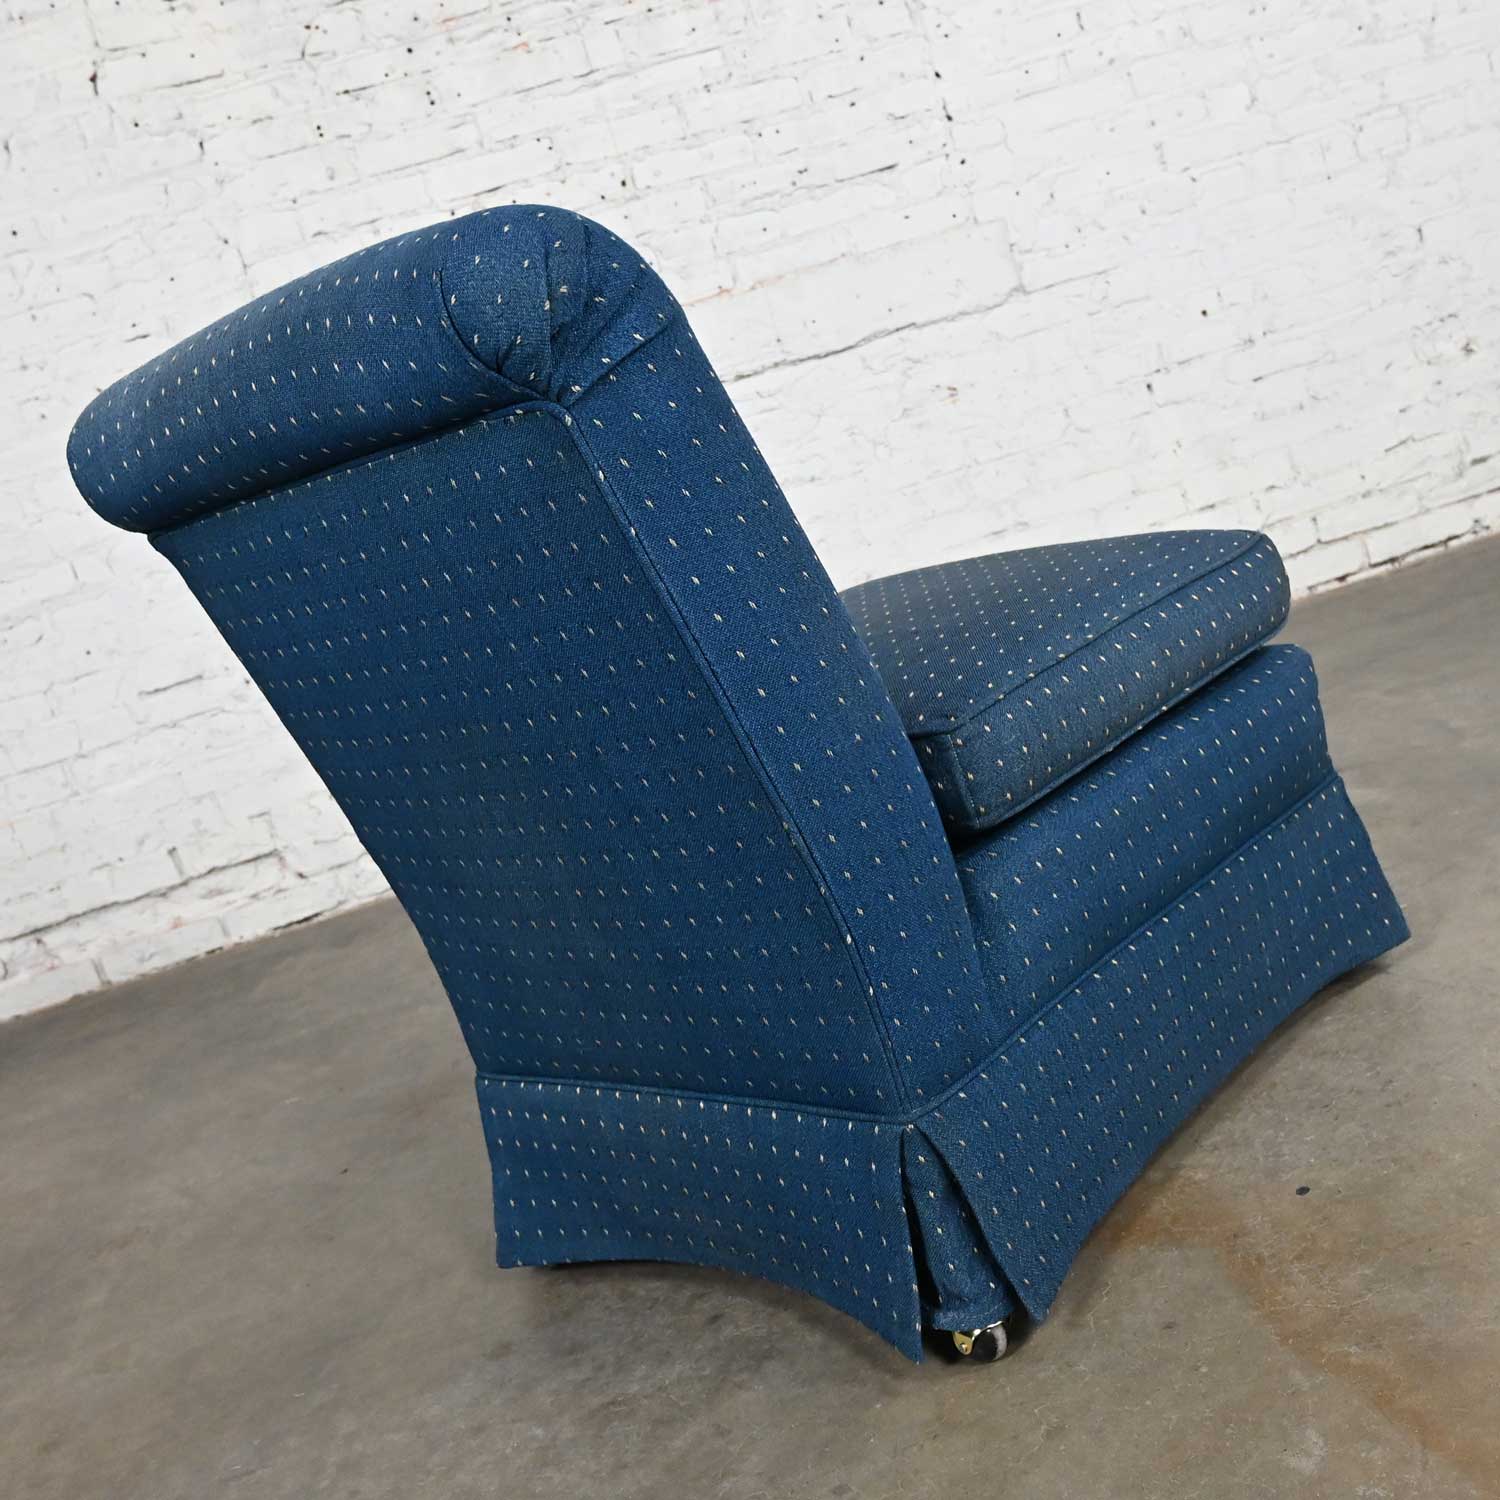 Mid-Late 20th Century Traditional or Hollywood Regency Blue Rolled Back Slipper Chair with Brass Ball Casters